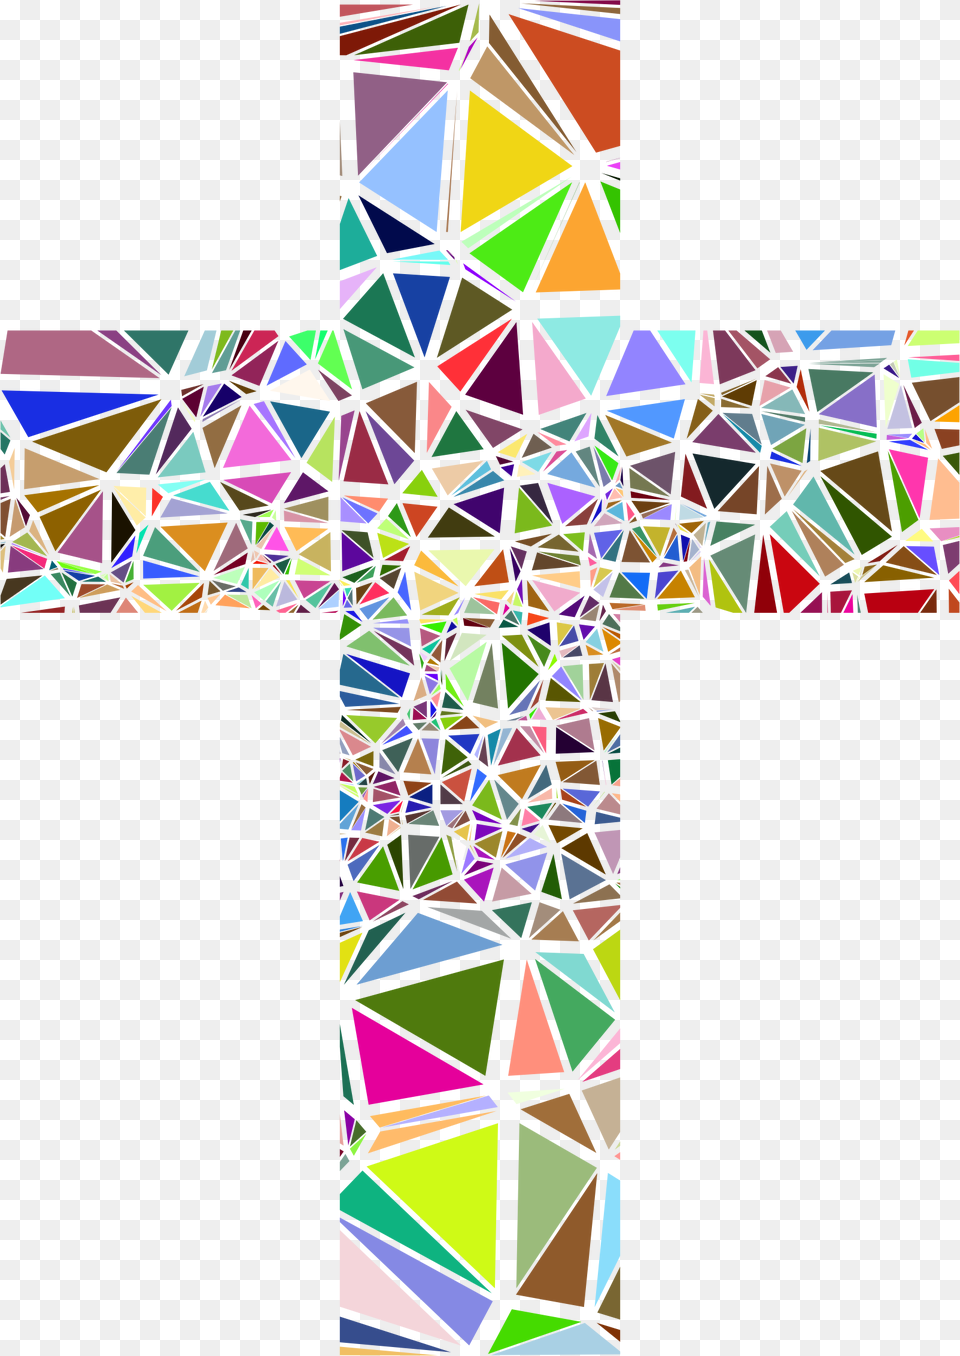 Transparent Catholic Cross Stained Glass Cross Clipart, Art, Symbol, Stained Glass Png Image